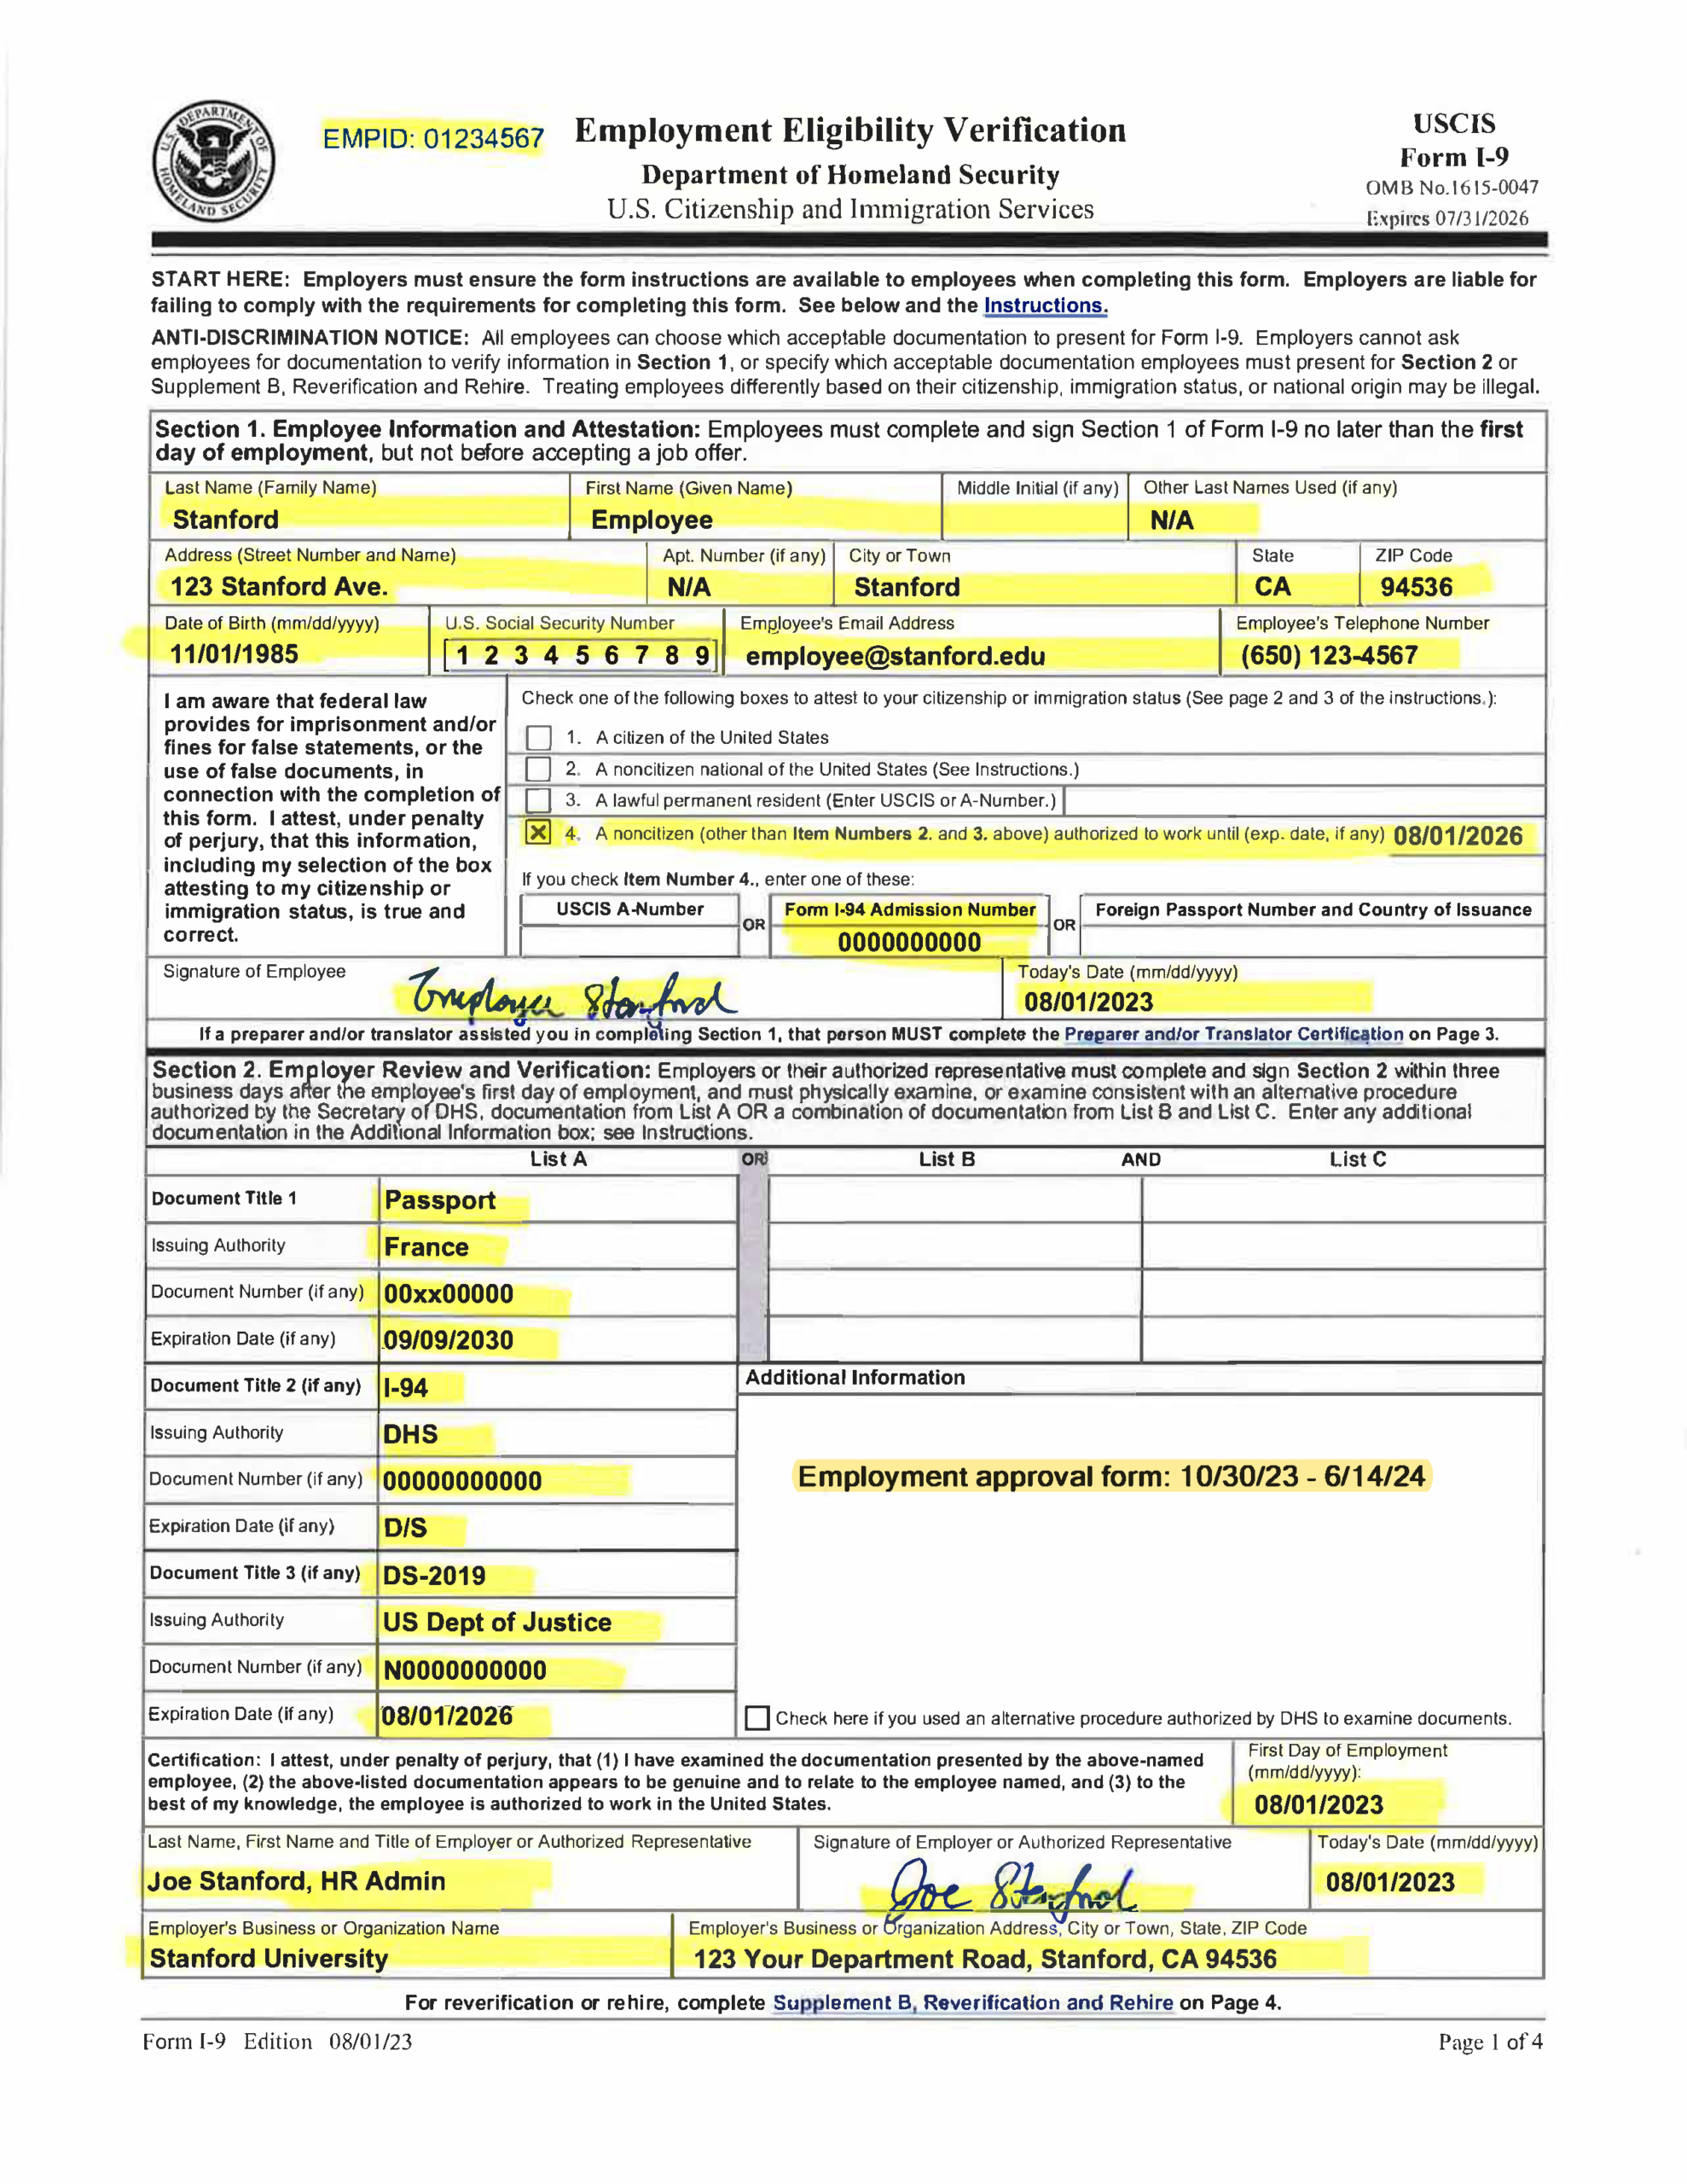 Examples Of Completed Form I-9 For Stanford intended for IRS I9 Form